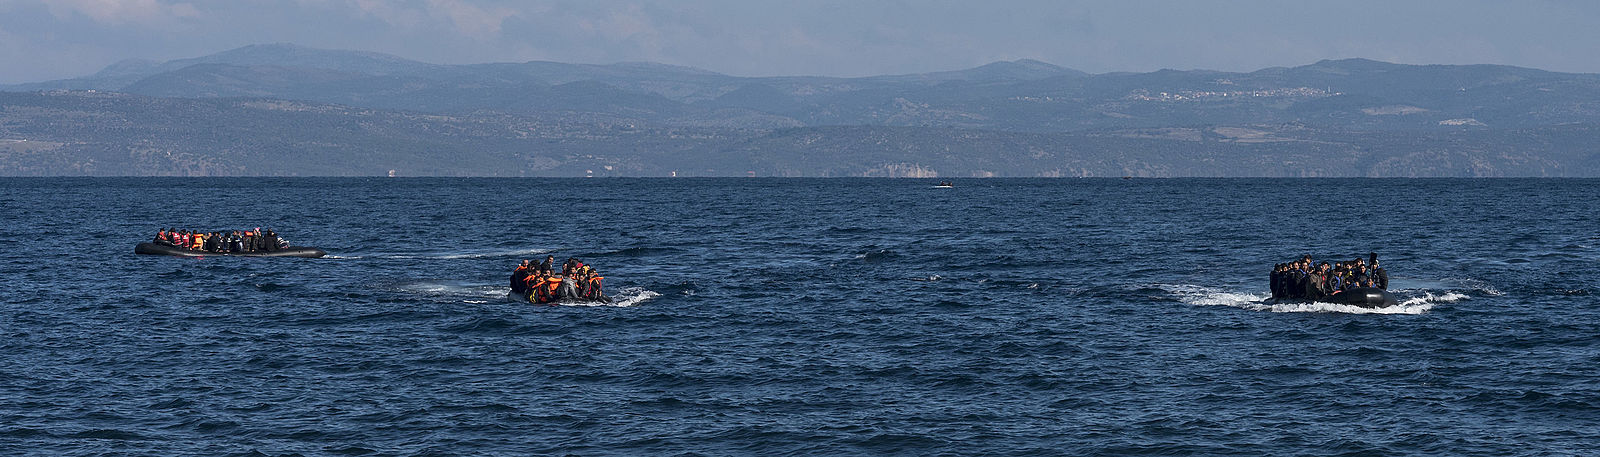 Human rights organisations demand justice for victims of Pylos shipwreck after &#8216;starkly divergent&#8217; accounts of events